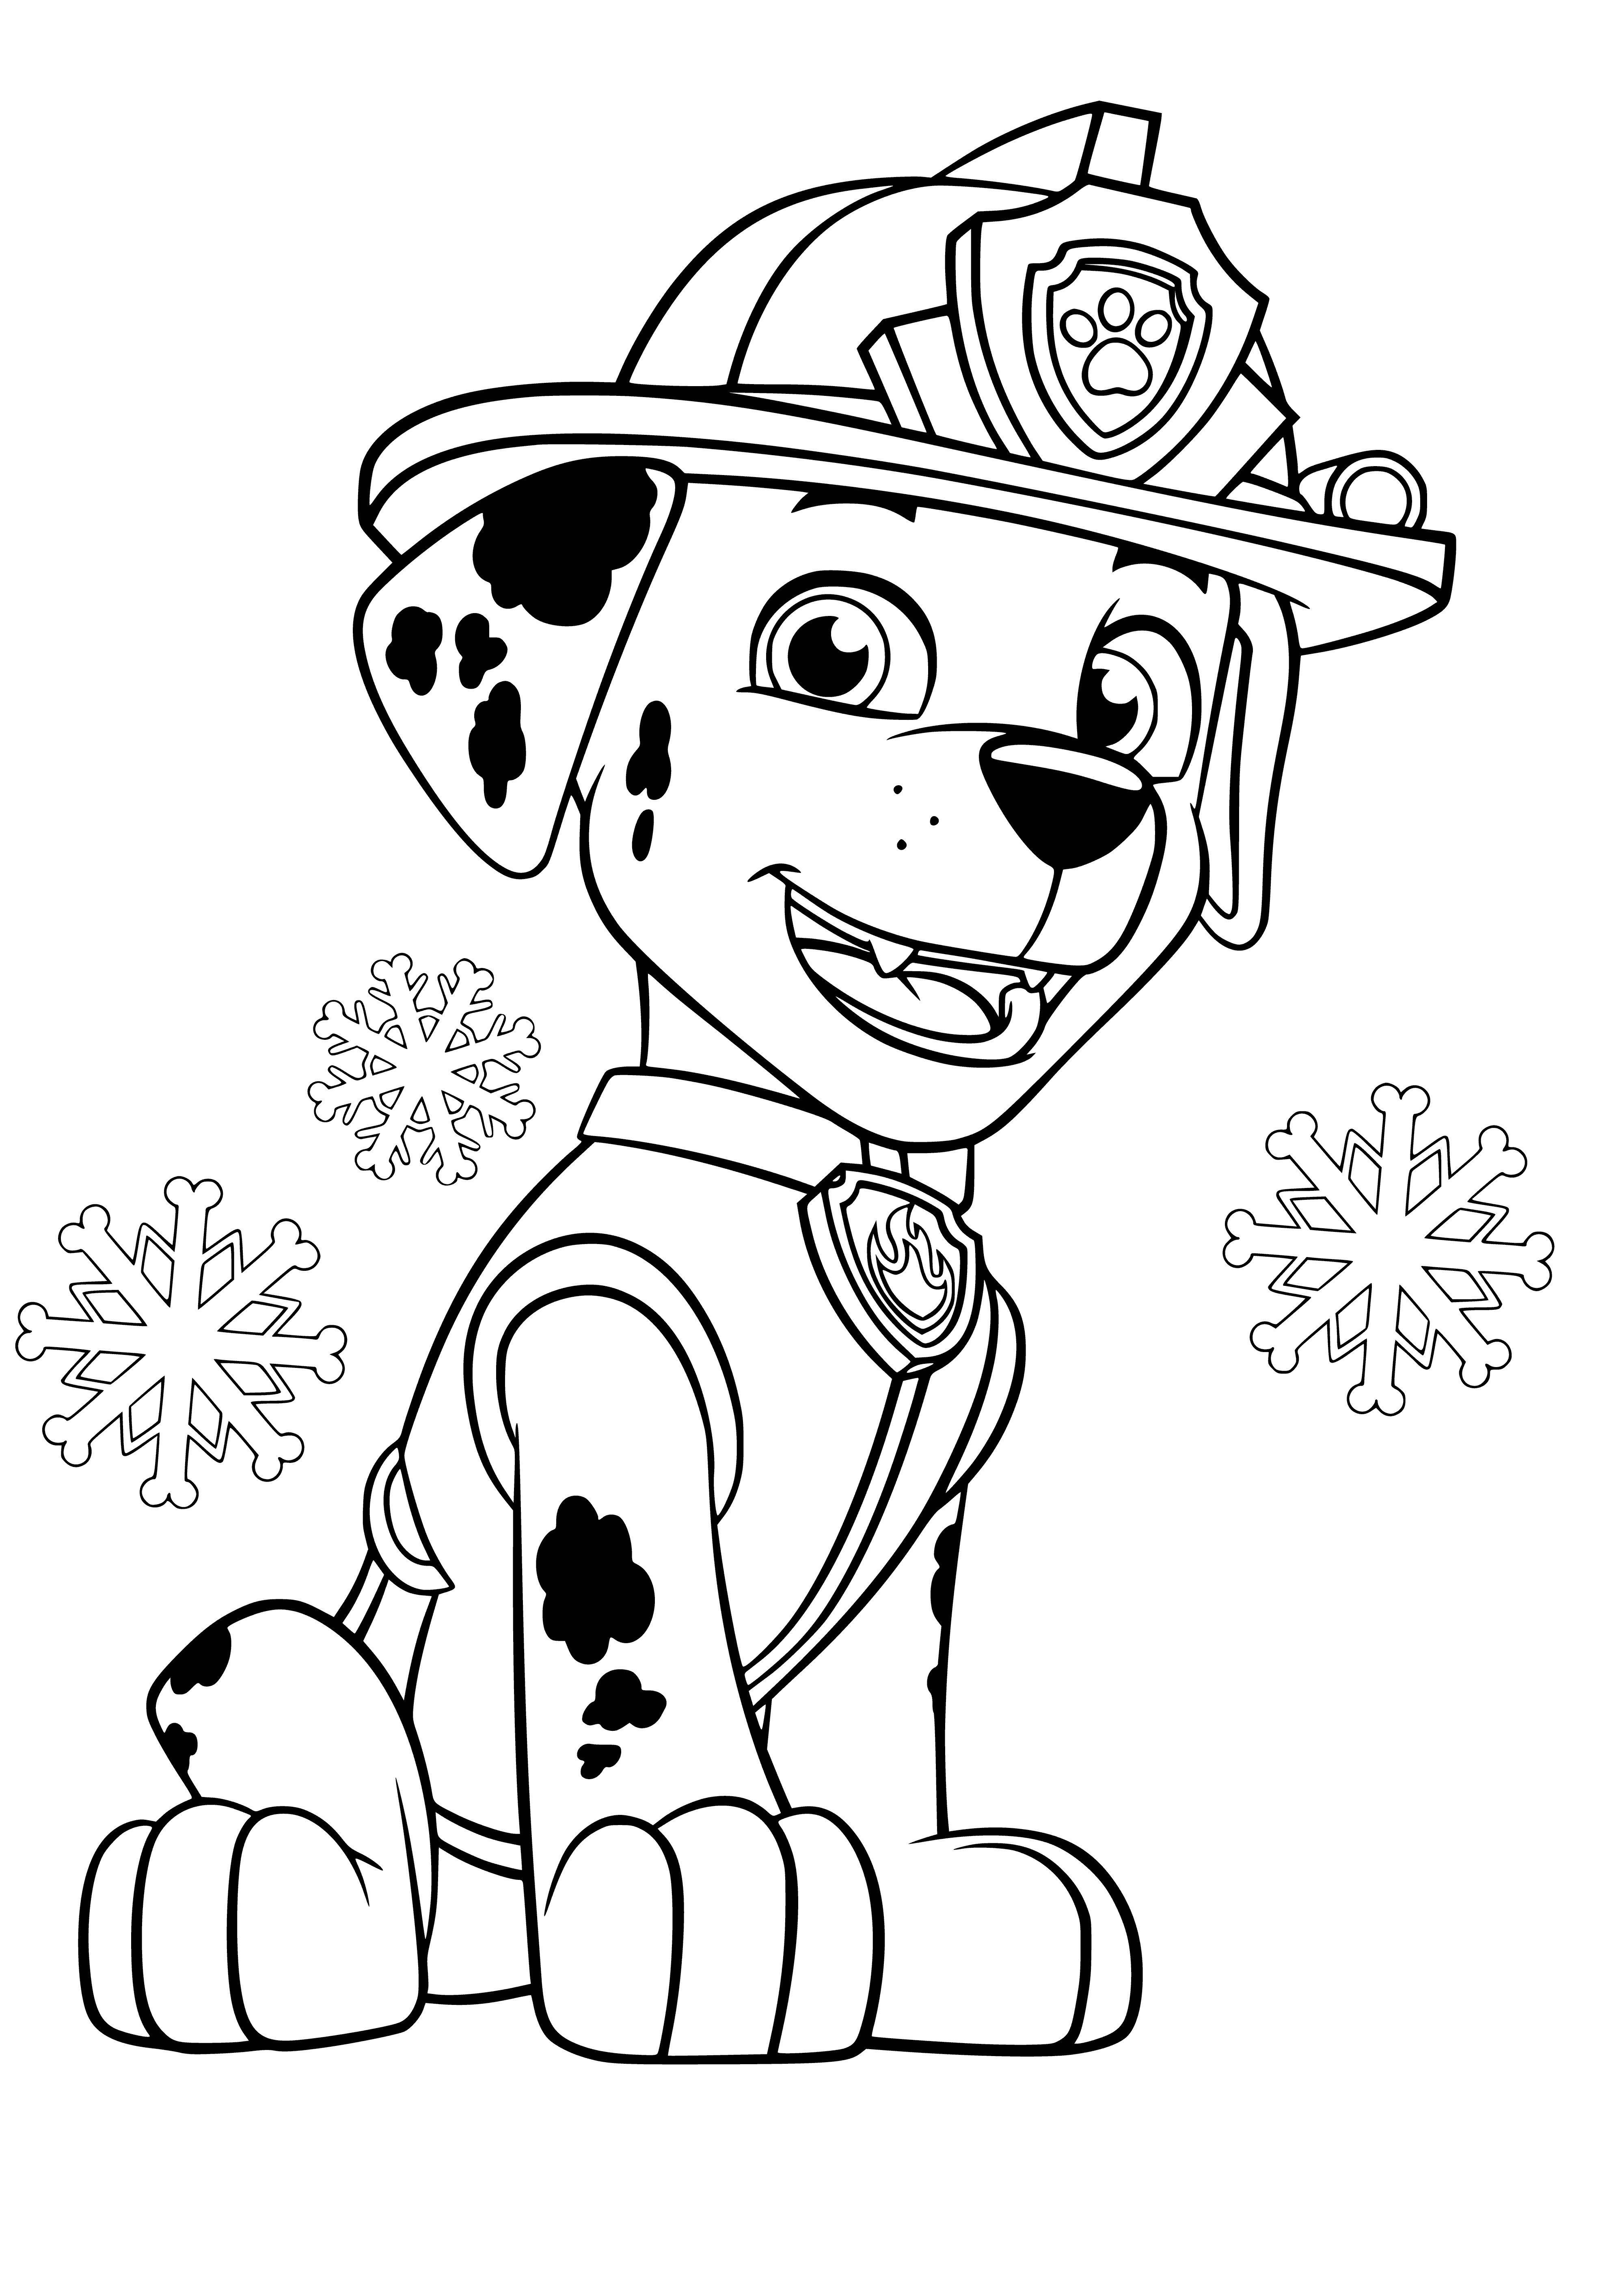 coloring page: Paw Patrol Marshal is all business on duty, brown uniform and spotted Dalmatian ears, red neckerchief and red Paw Patrol backpack, ready to solve any mystery with binoculars and badge. #pawpatrol #dalmatianmarshal